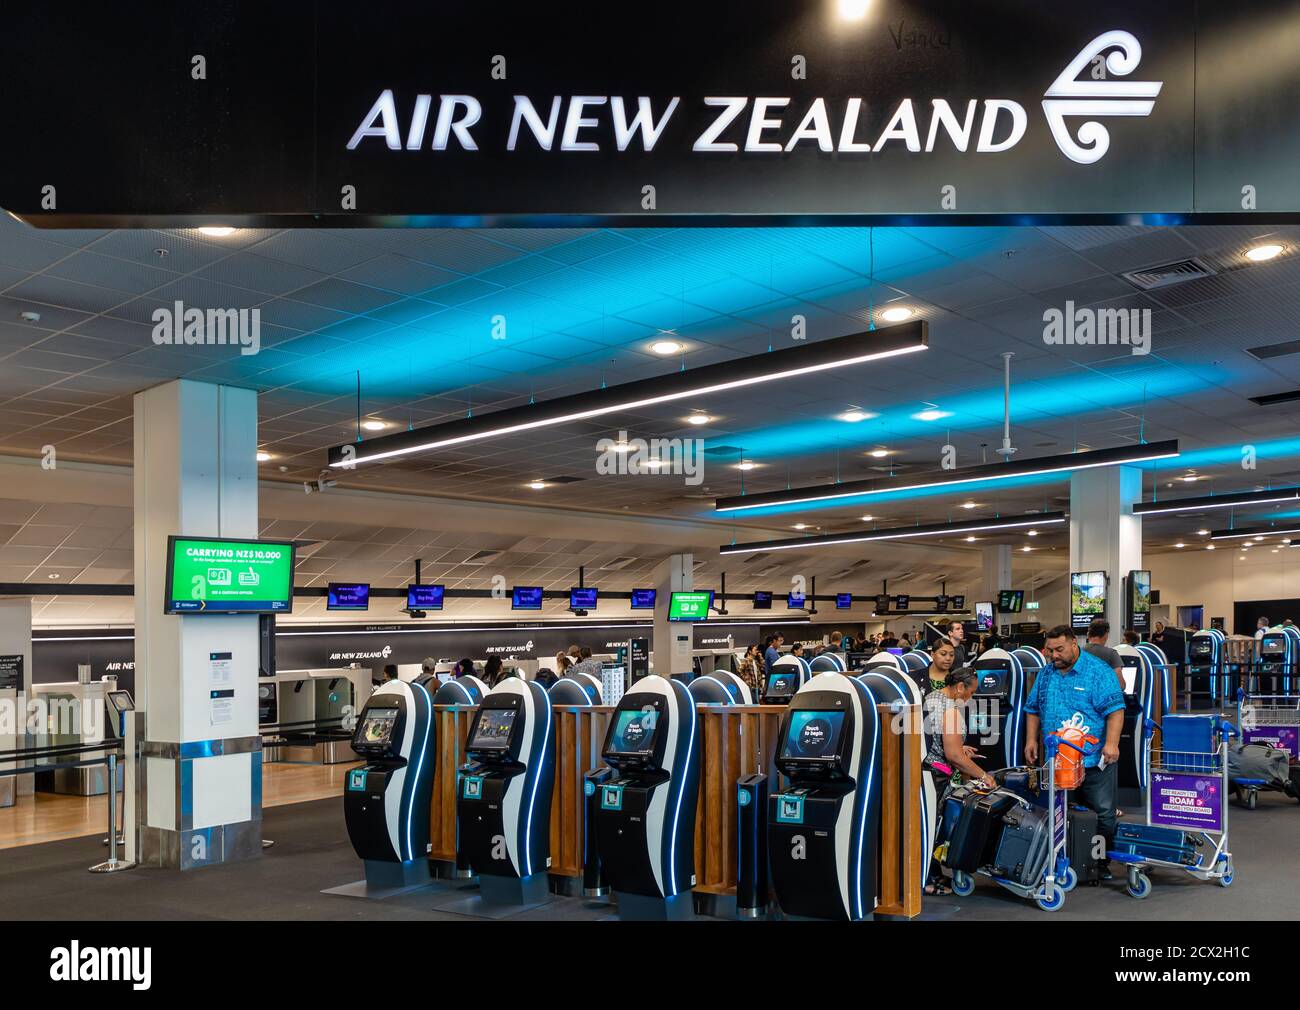 Auckland, New Zealand: Self service Mobile kiosk for check-in to New Zealand Airlines at Auckland International Airport, boarding pass and baggage tag Stock Photo